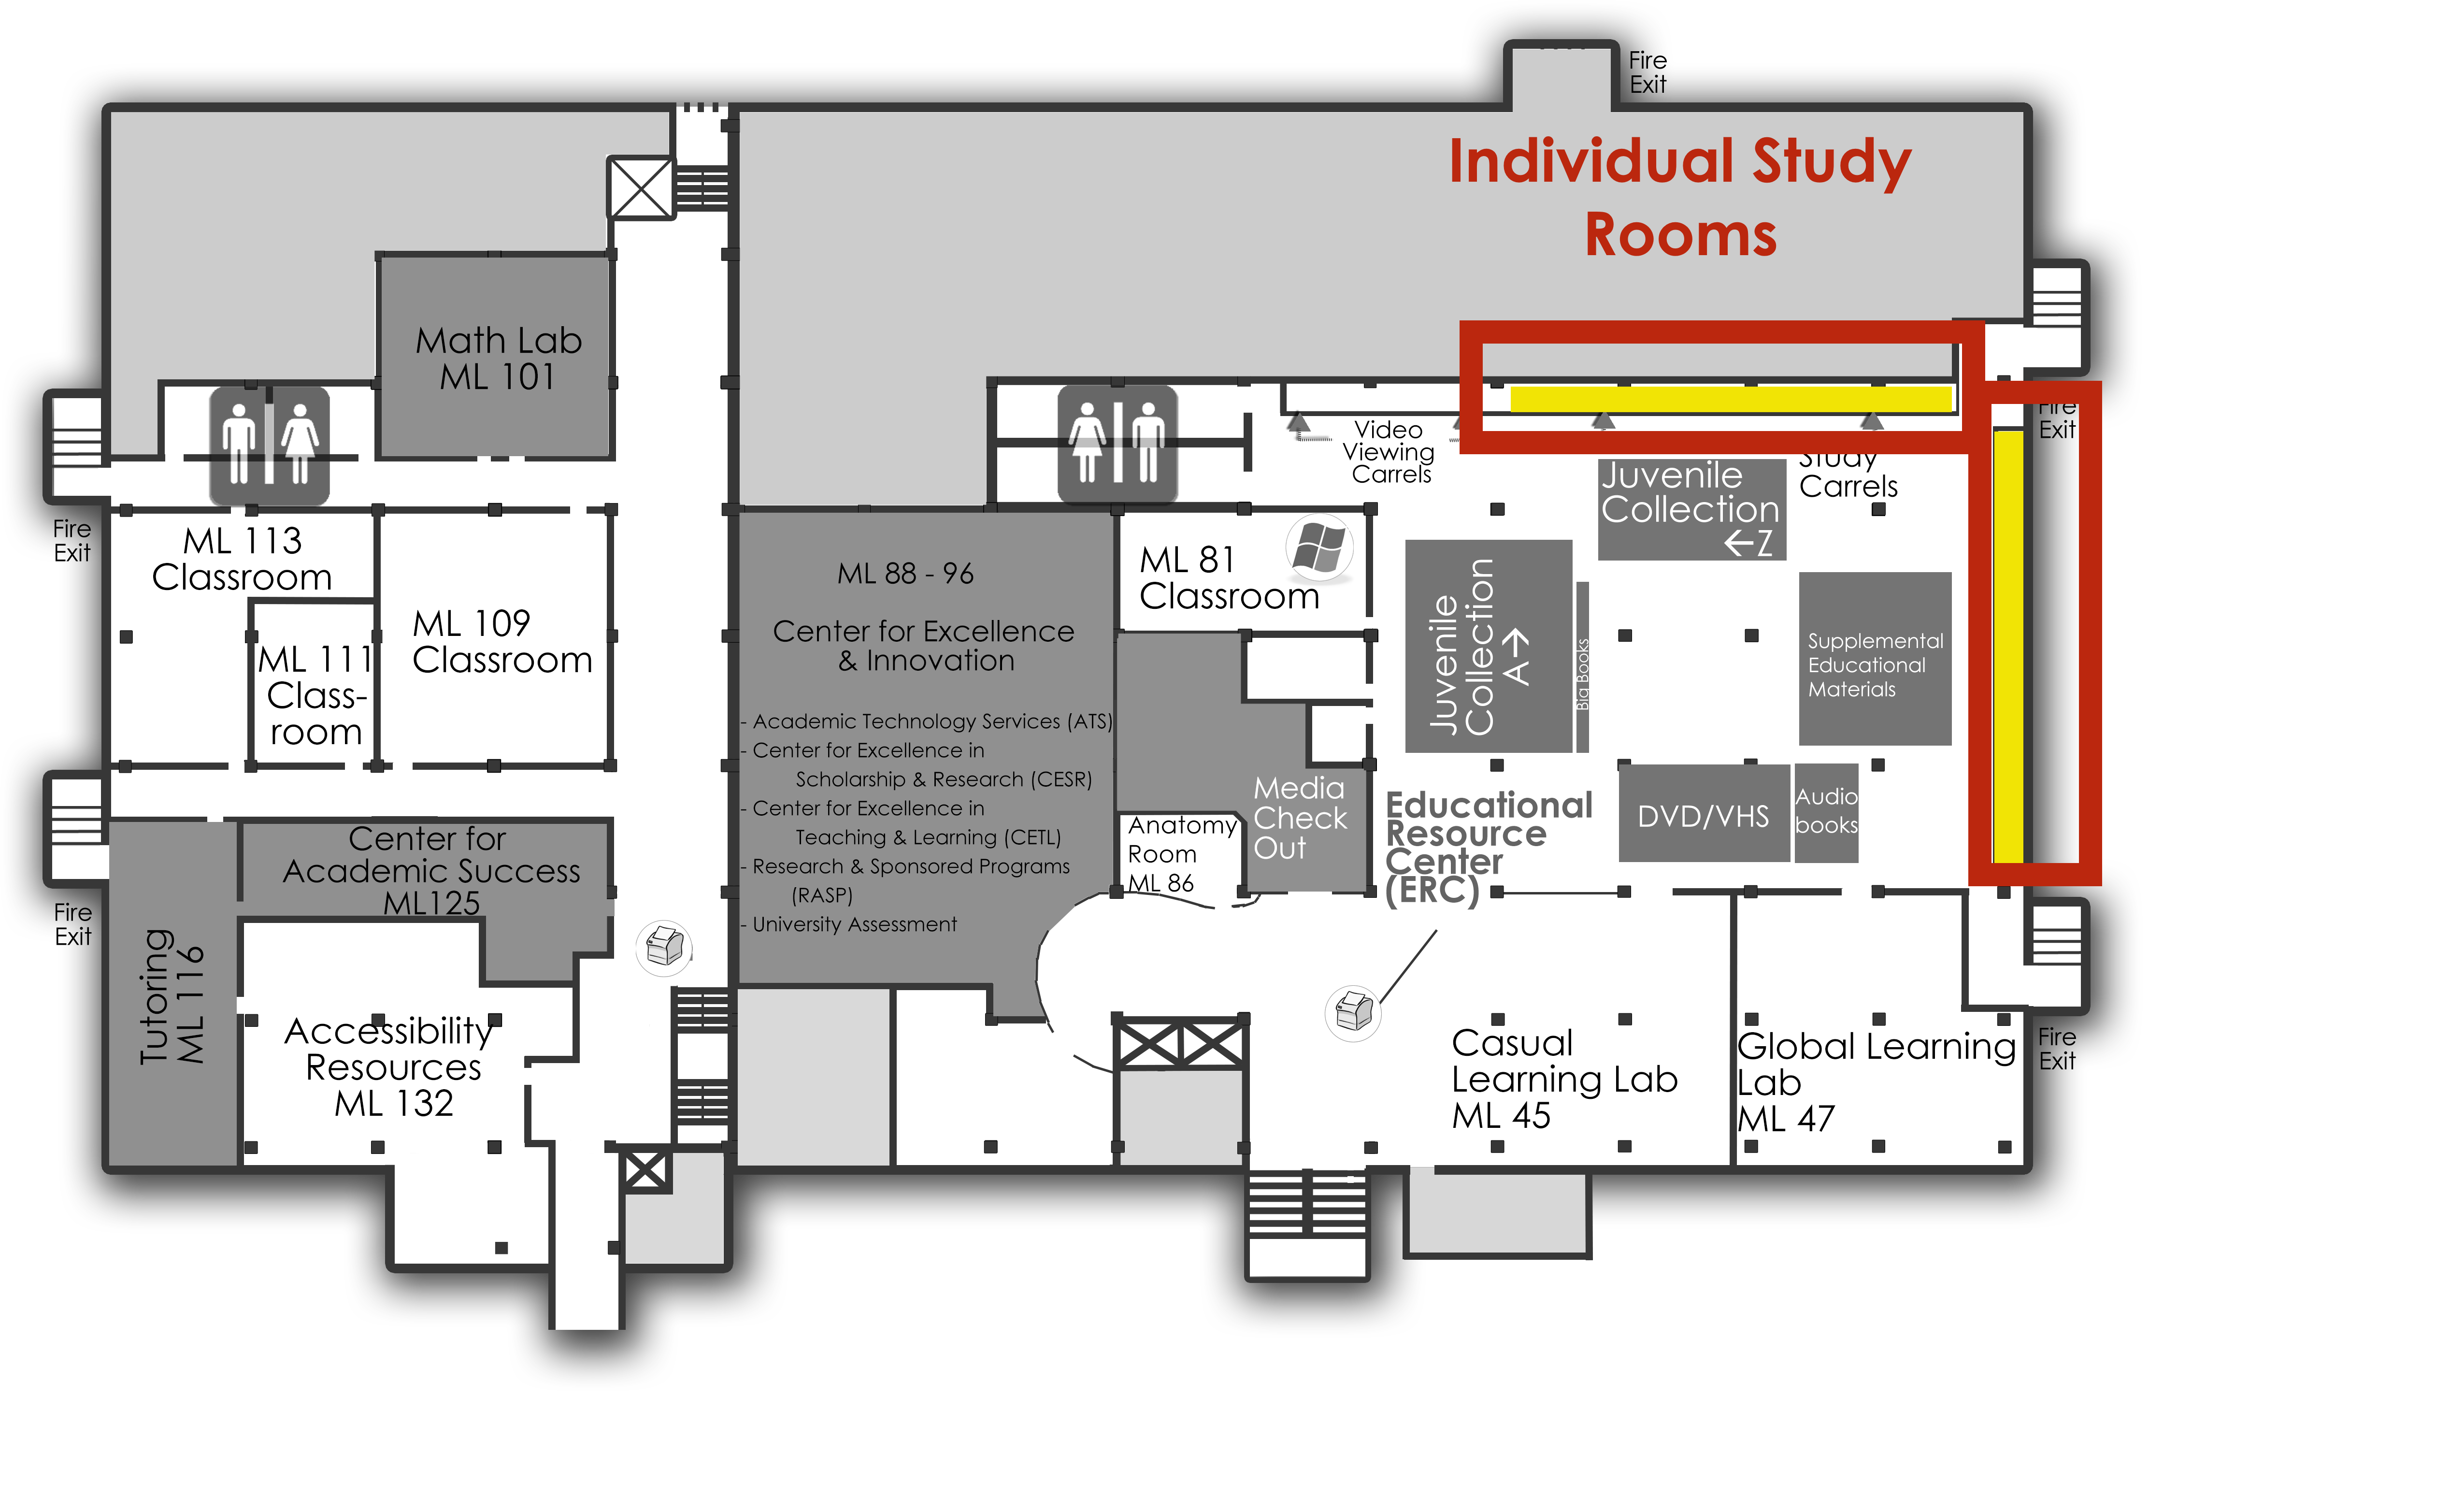 Individual Study Rooms are located in the back of the ERC, lower level east of Memorial Library